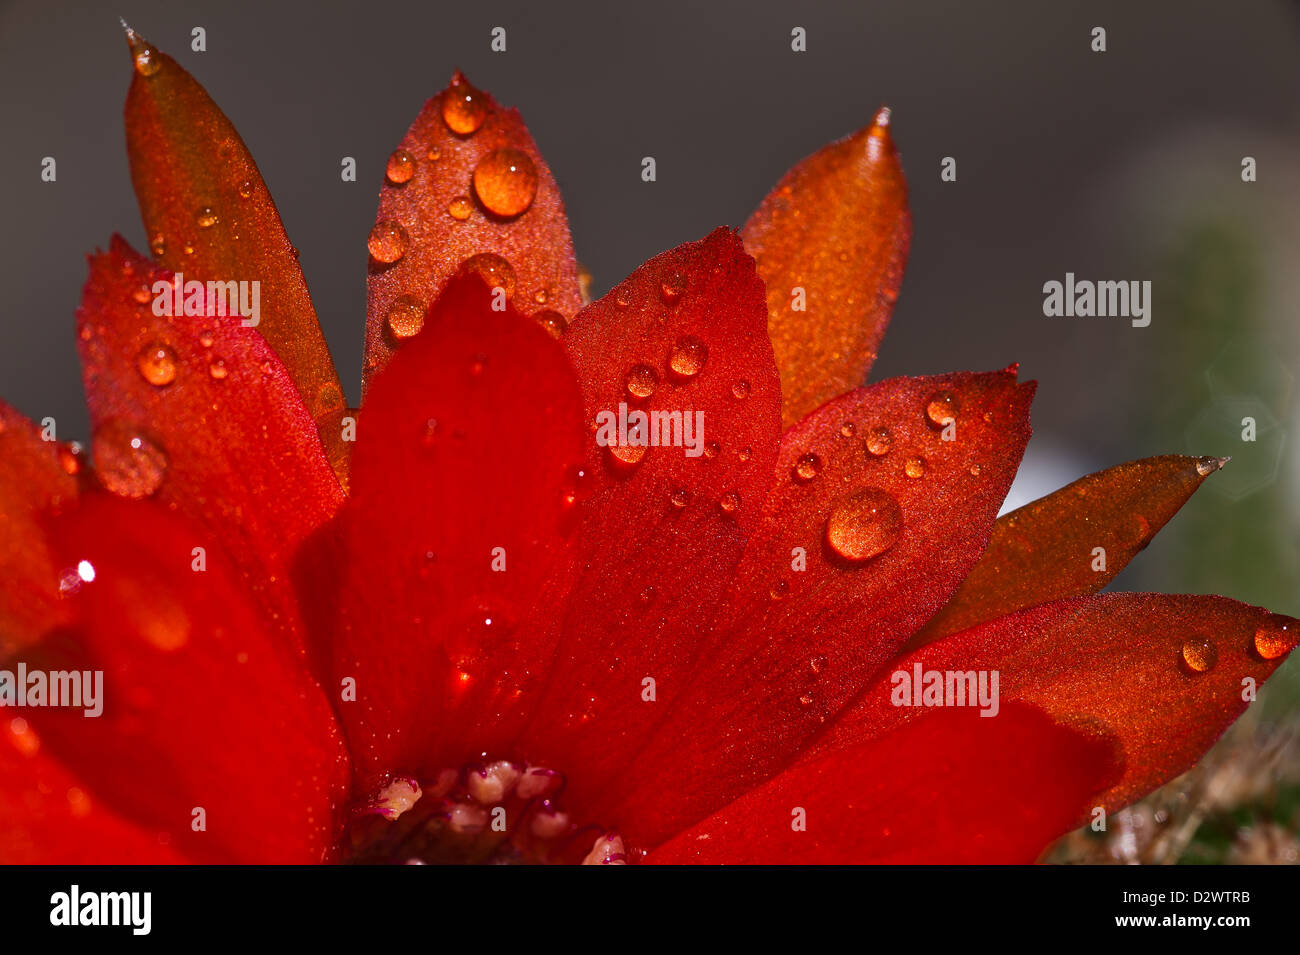 red cactus flower covered in water droplets rain bright petals against darker background Stock Photo